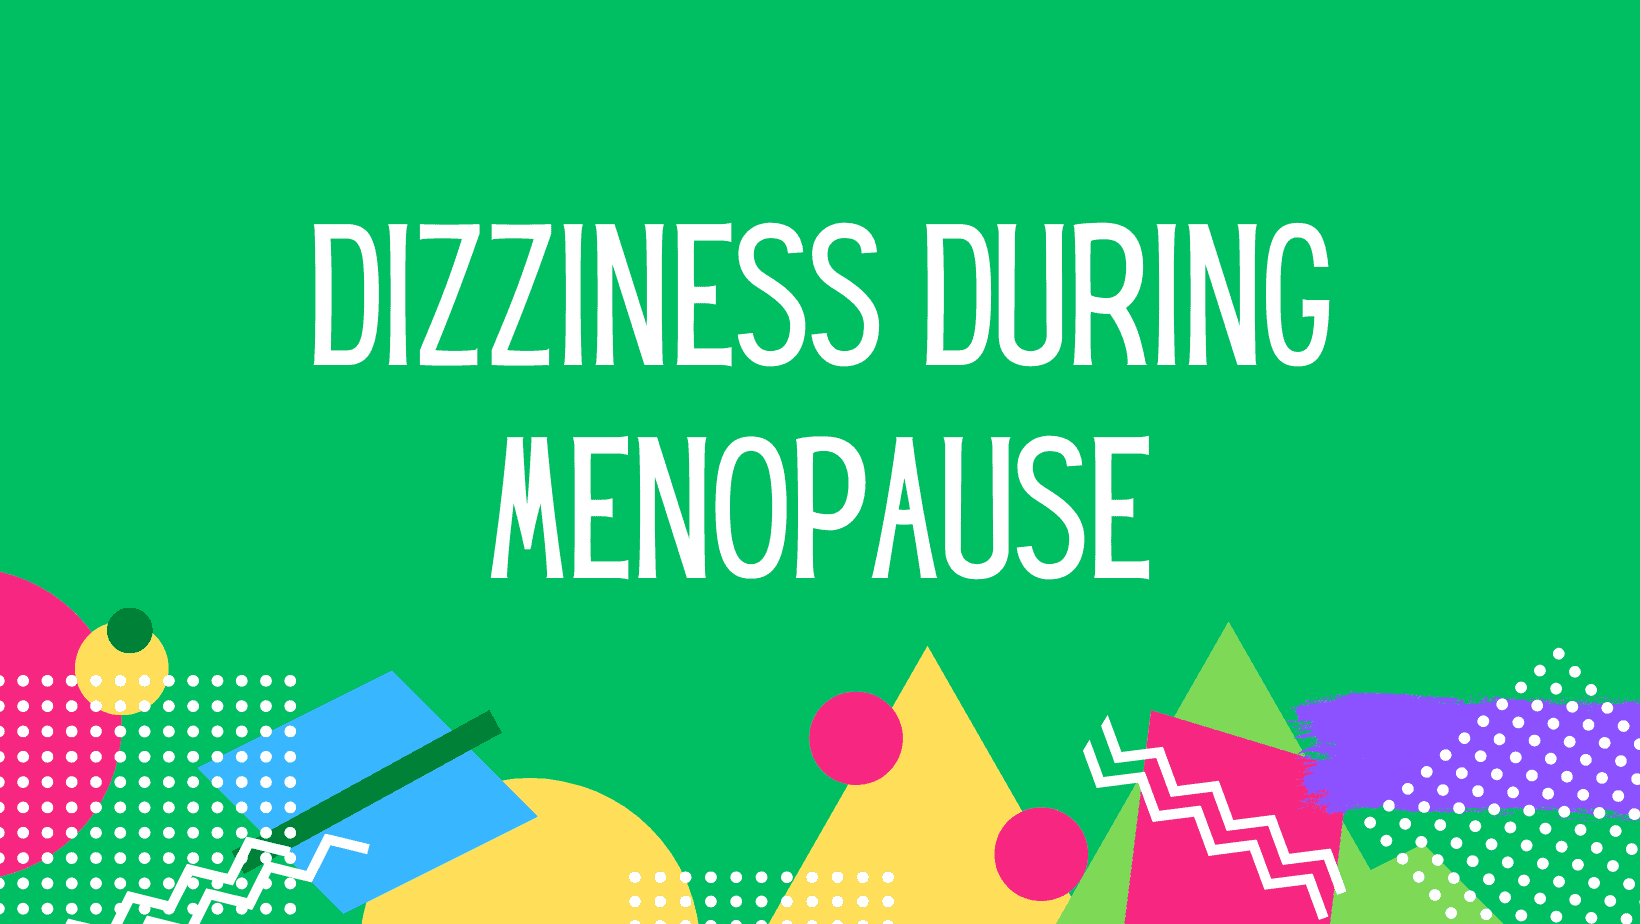 Natural Remedies For Dizziness During Menopause - Hot And Bothered